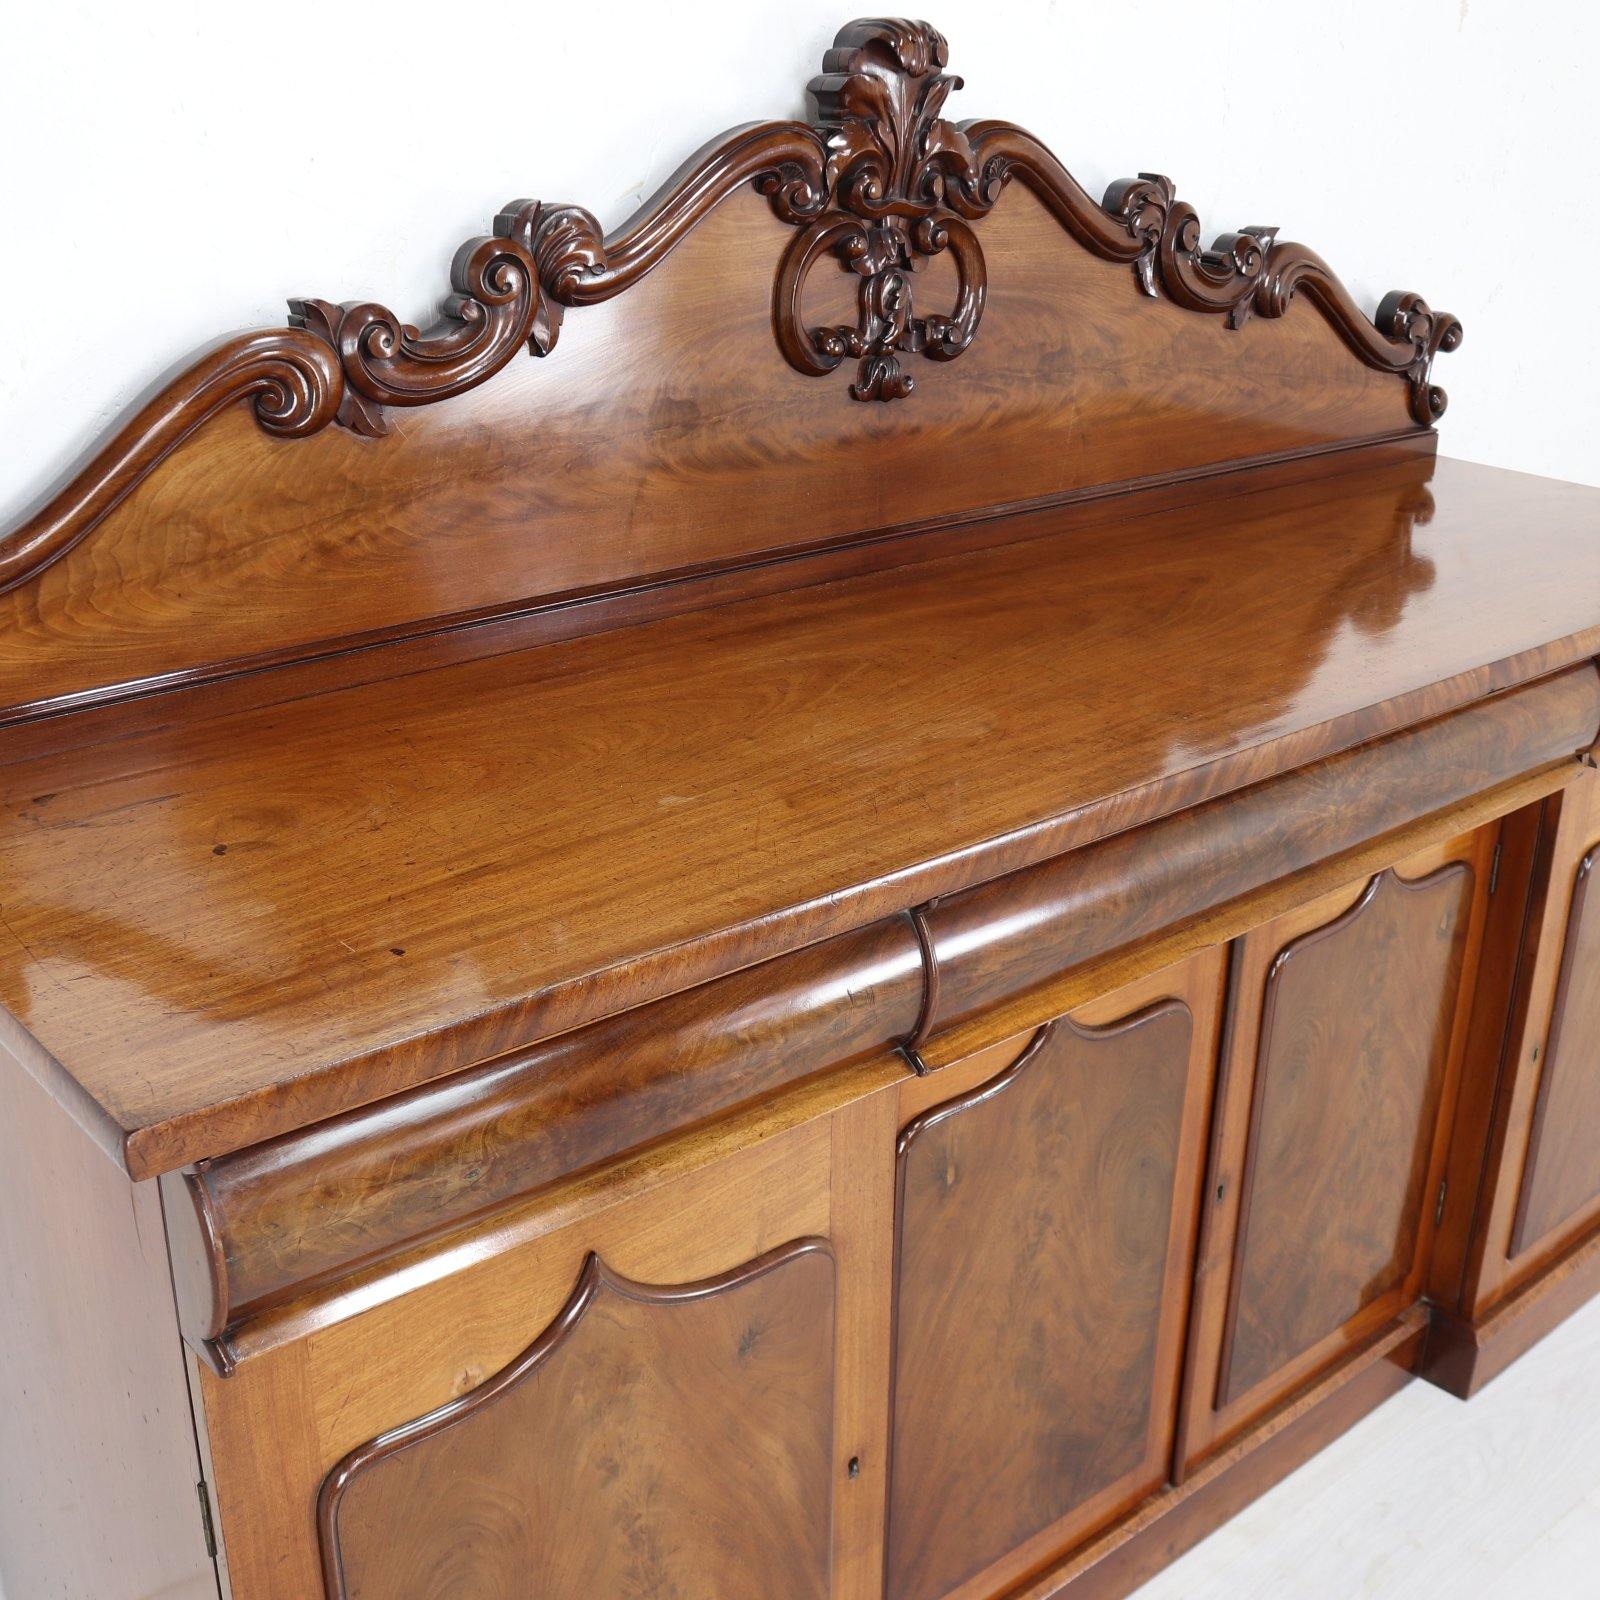 Antique Victorian Breakfront Sideboard, Large Mahogany and Walnut Chiffonier - teakyfinders